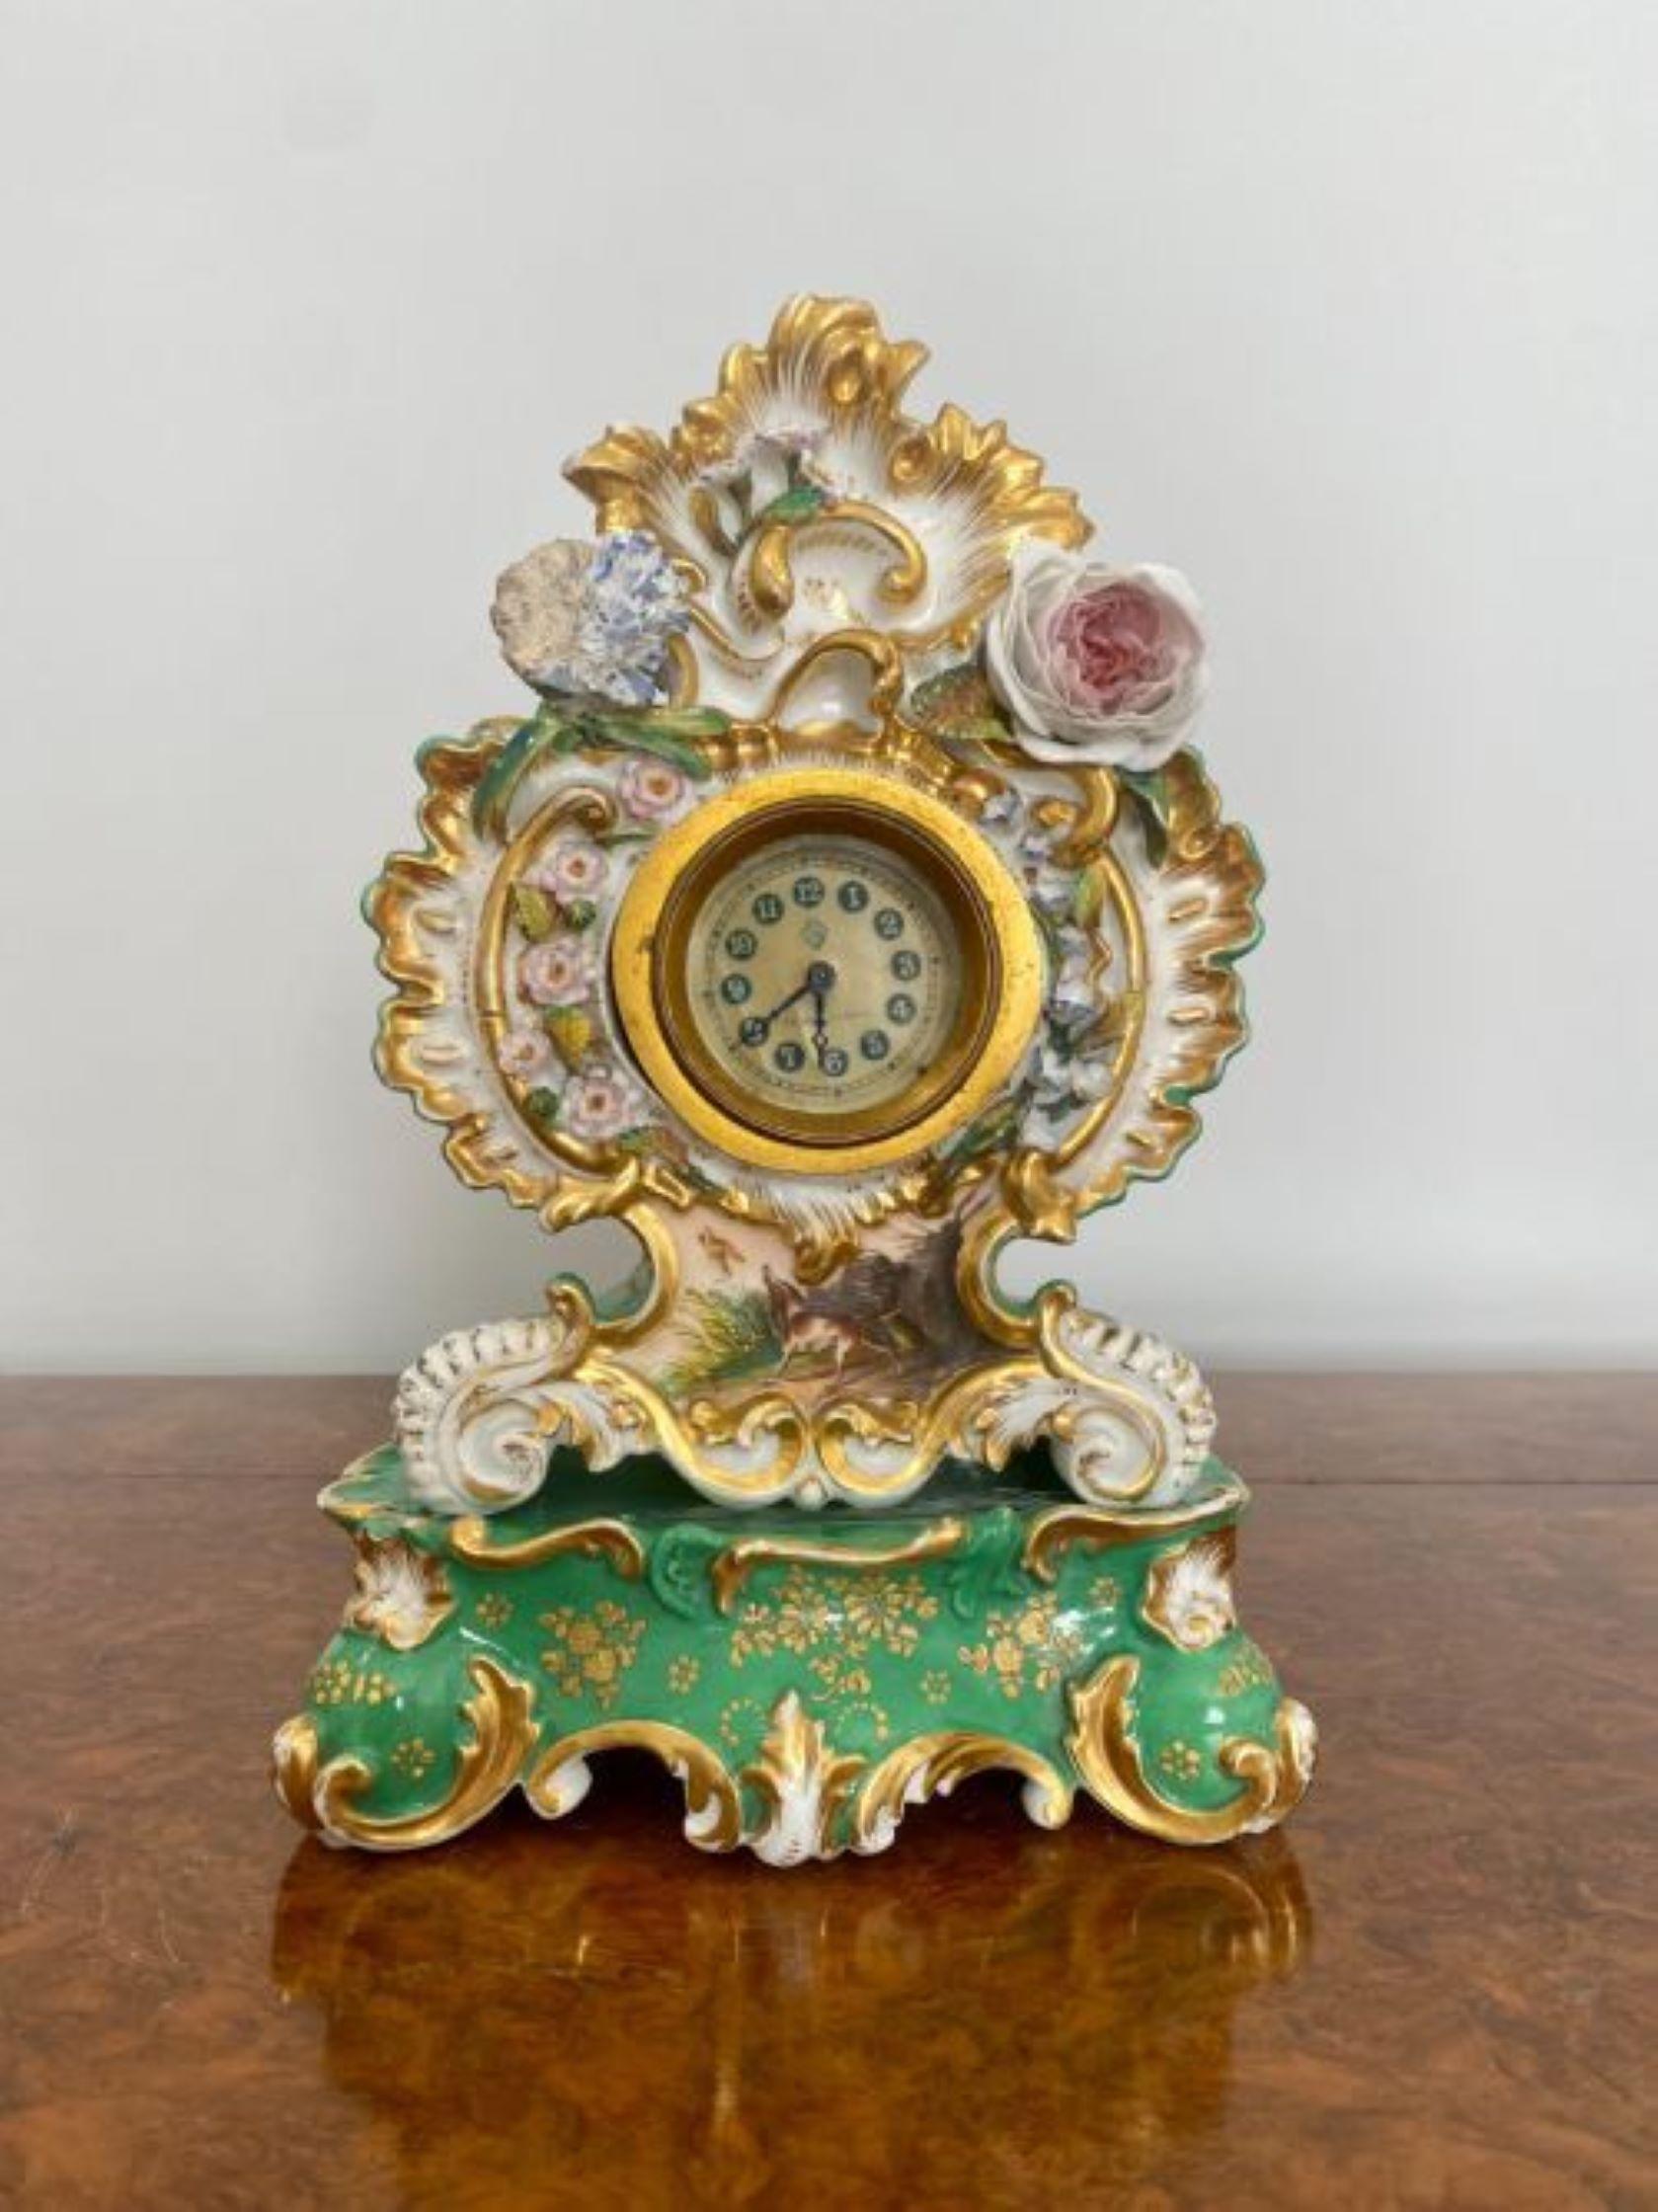 Antique Edwardian Quality Hand Painted Porcelain Mantle Clock In Good Condition For Sale In Ipswich, GB